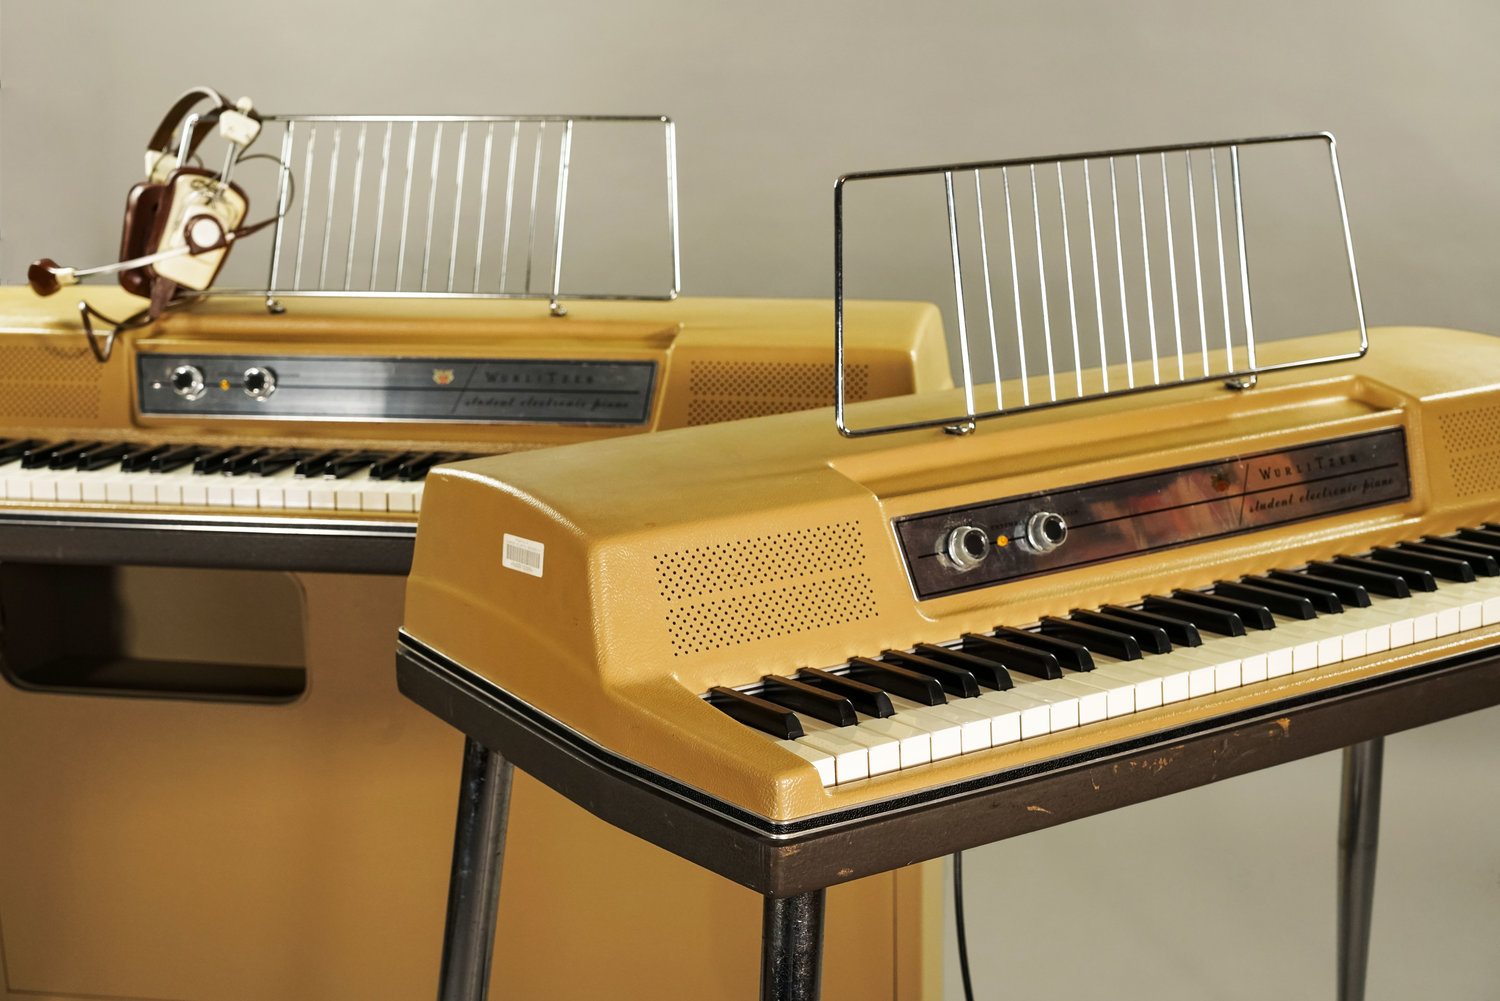 What's the Difference Between a Wurlitzer 140 and 200a?